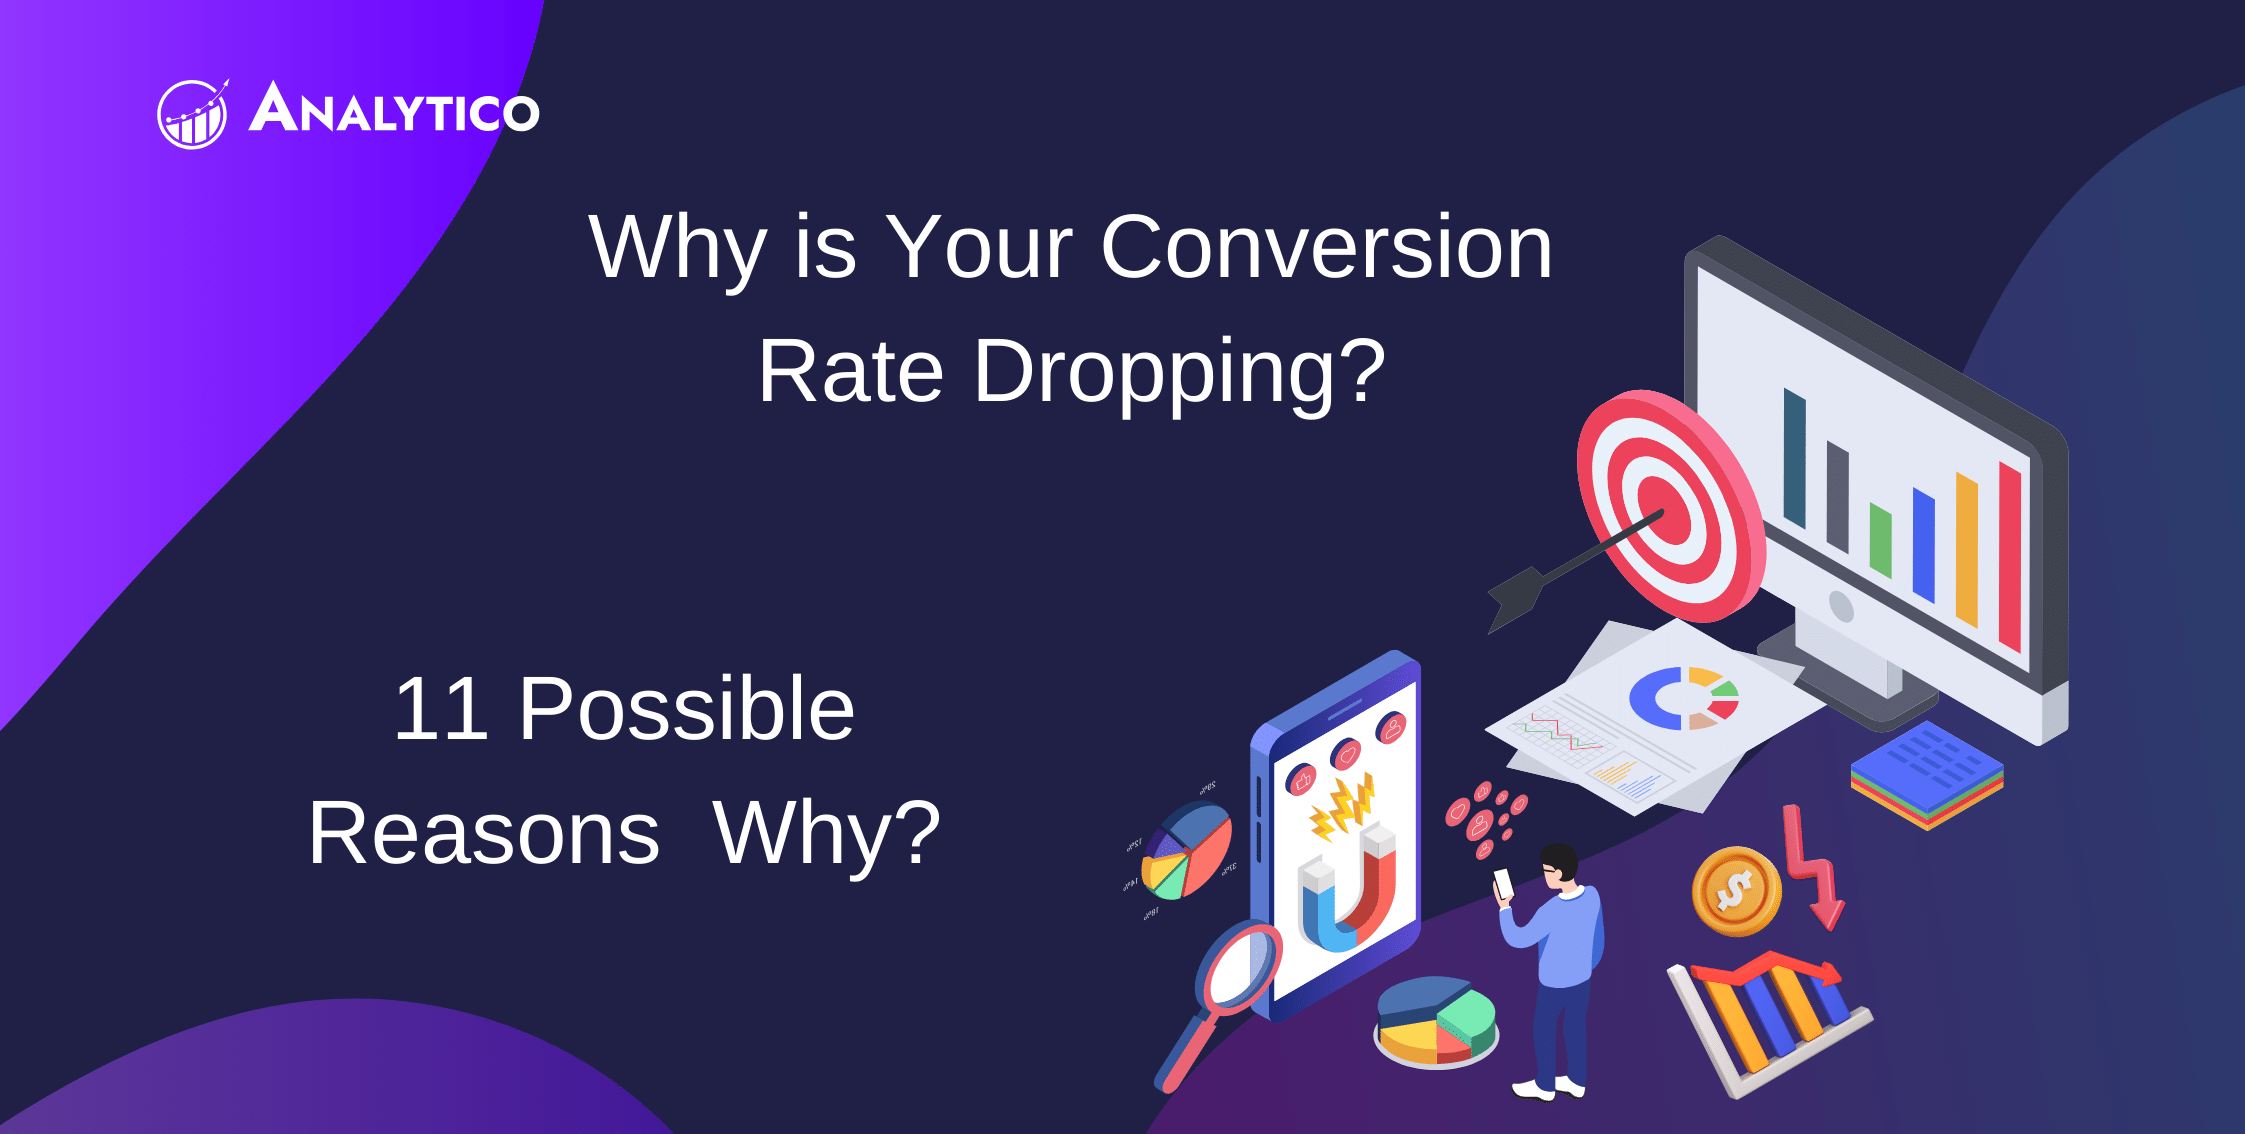 Why is your Conversion Rate Dropping? 11 Possible Reasons.